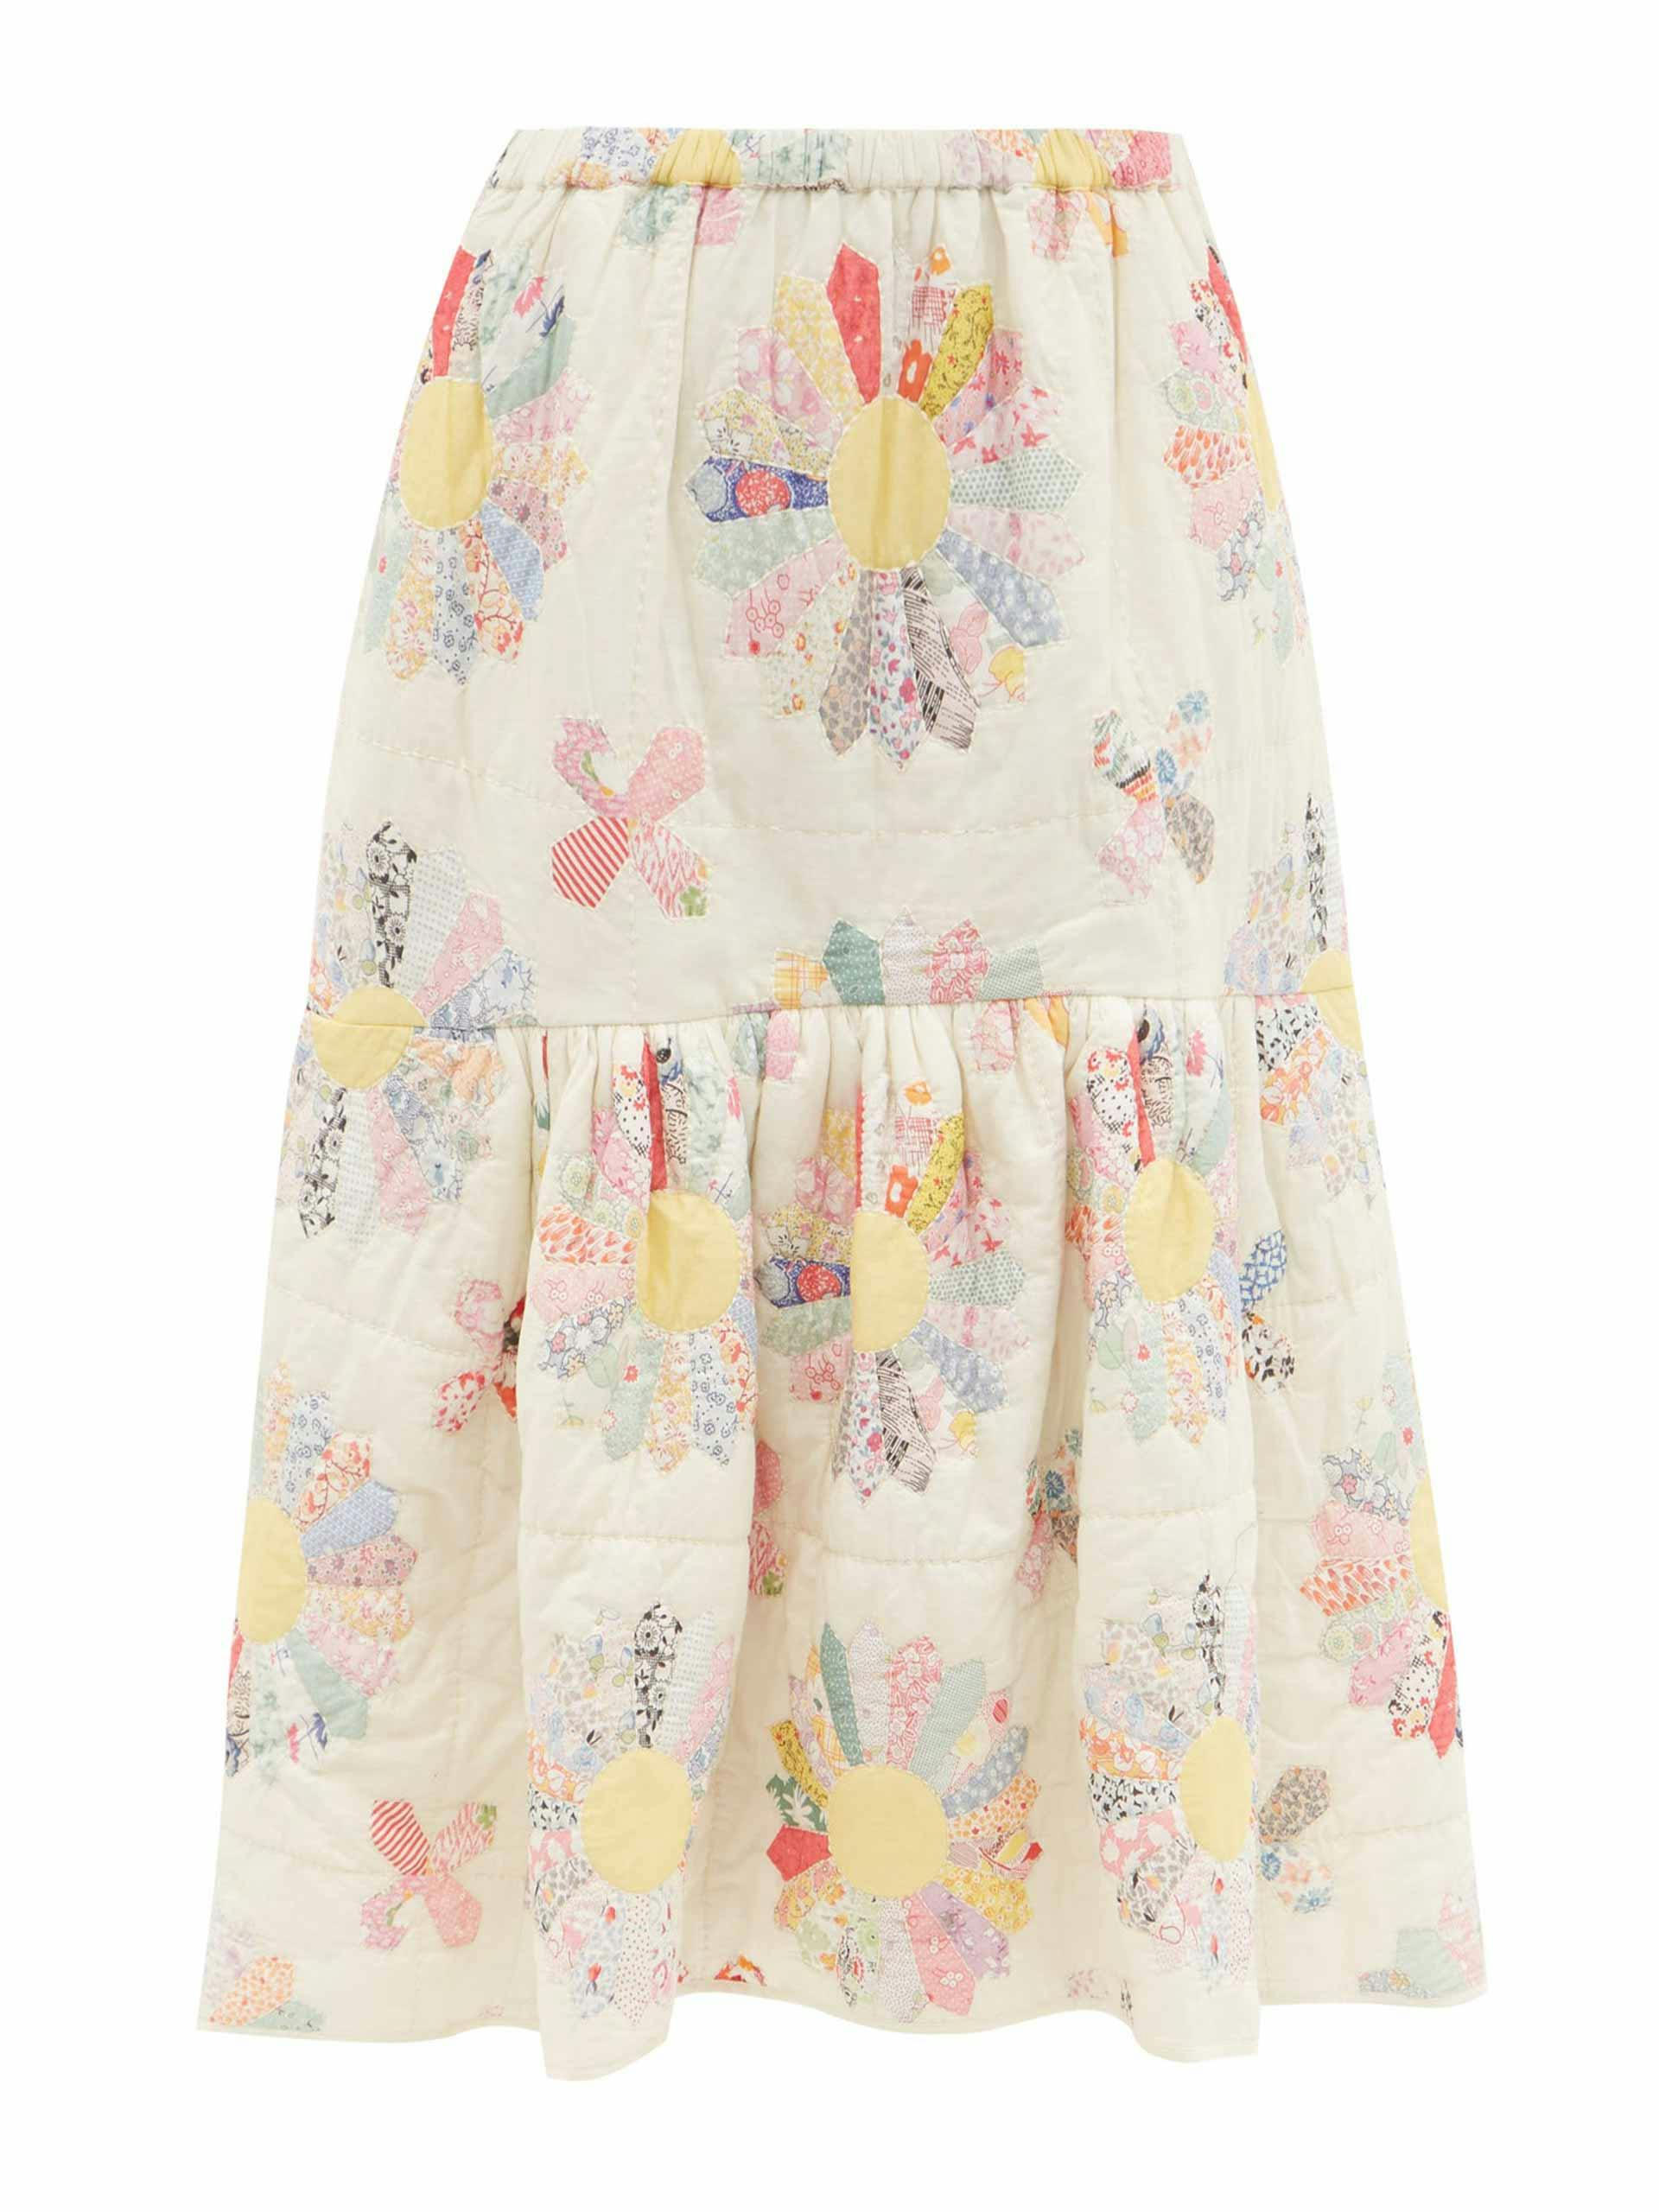 Ivory cotton and pastel quilted skirt